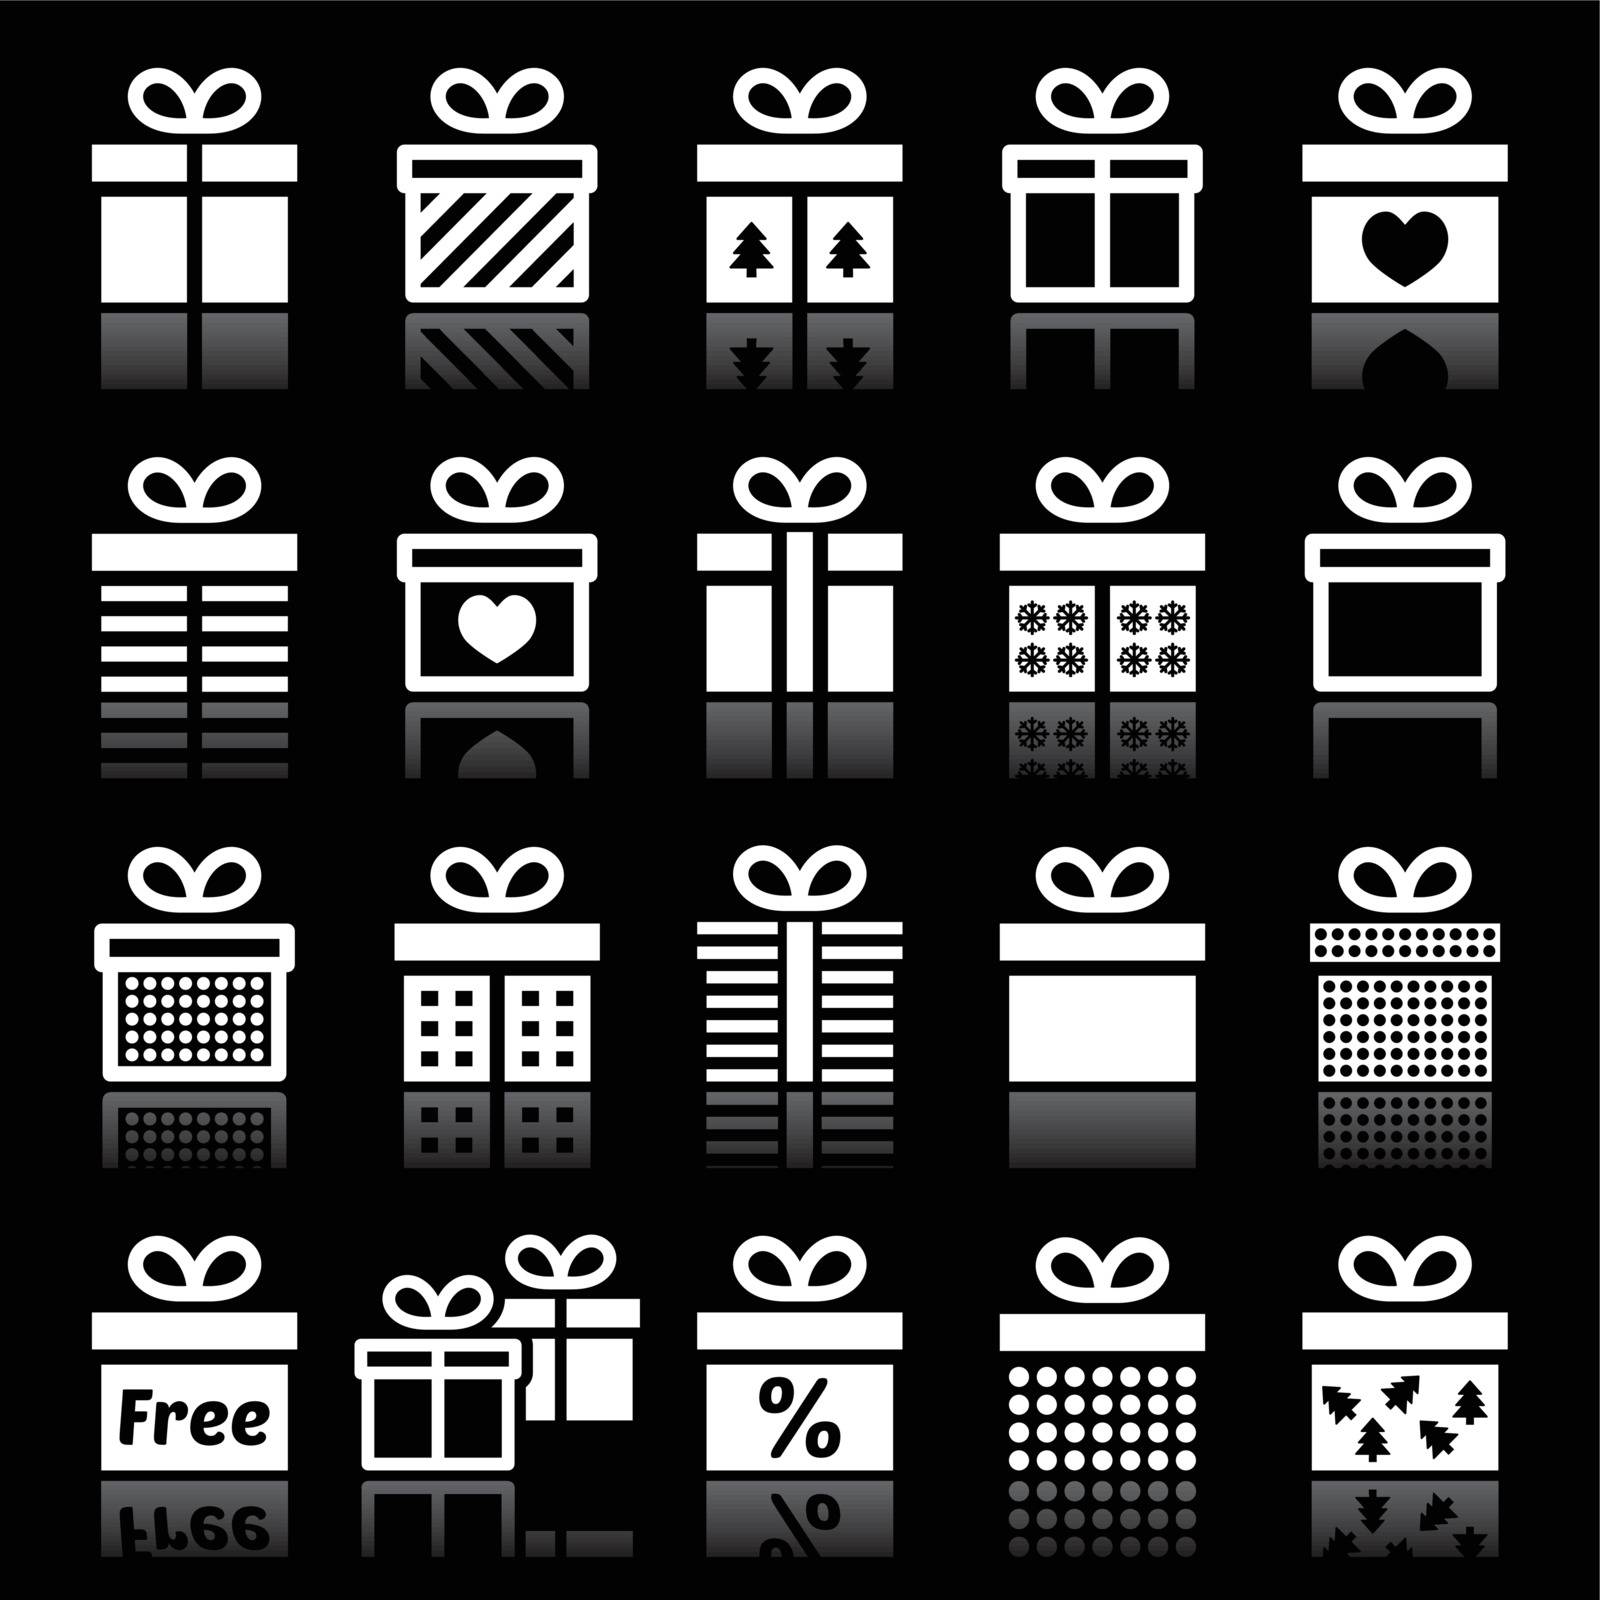 Monochrome icons set of presents isolated on black background